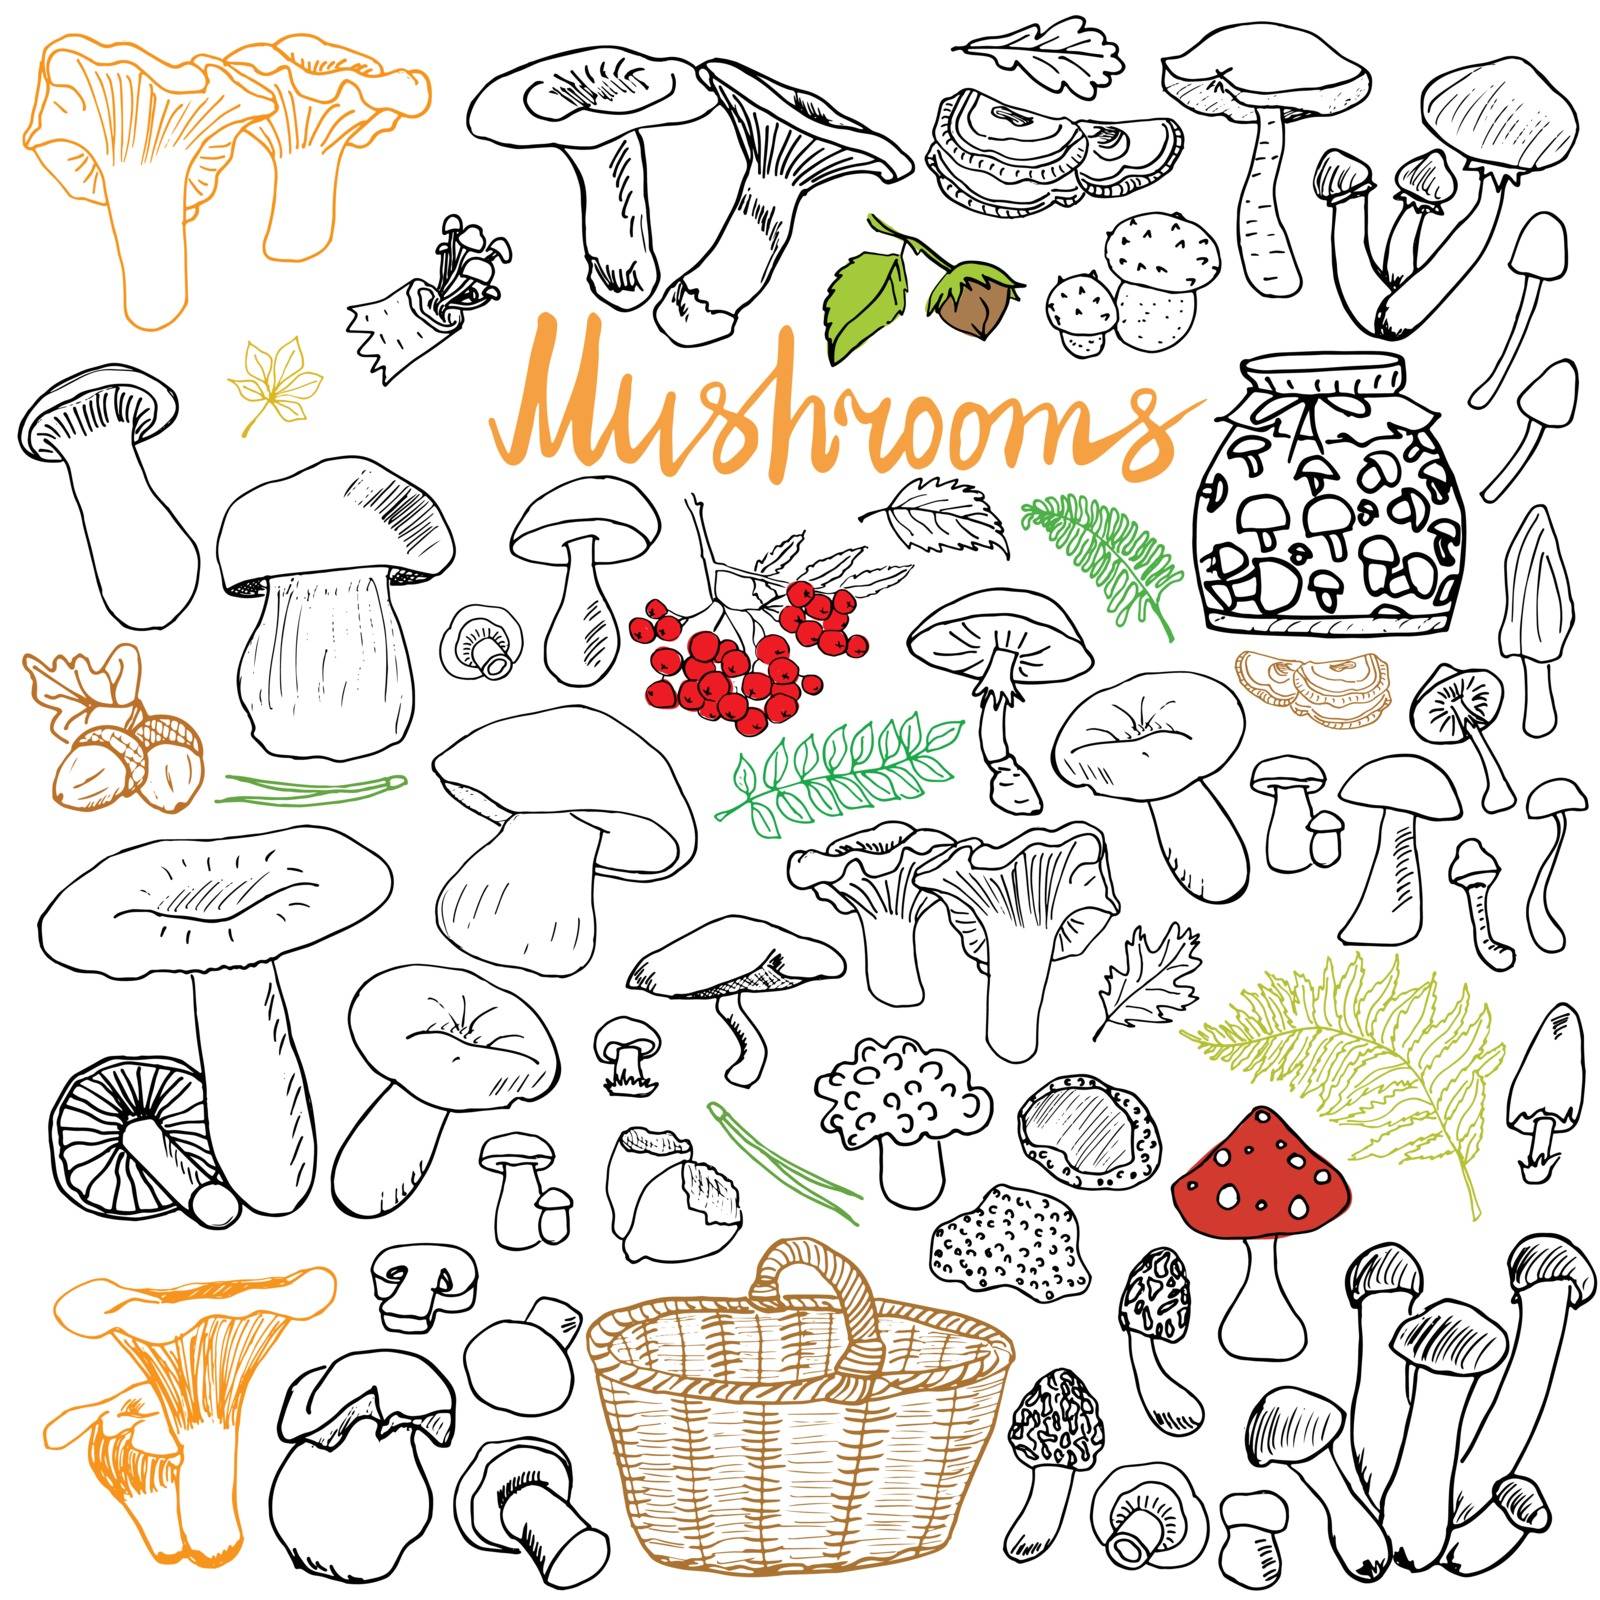 Mushrooms sketch doodles hand drawn set. Different types of edible and non edible mushrooms. Vector icons on Chalkboard background